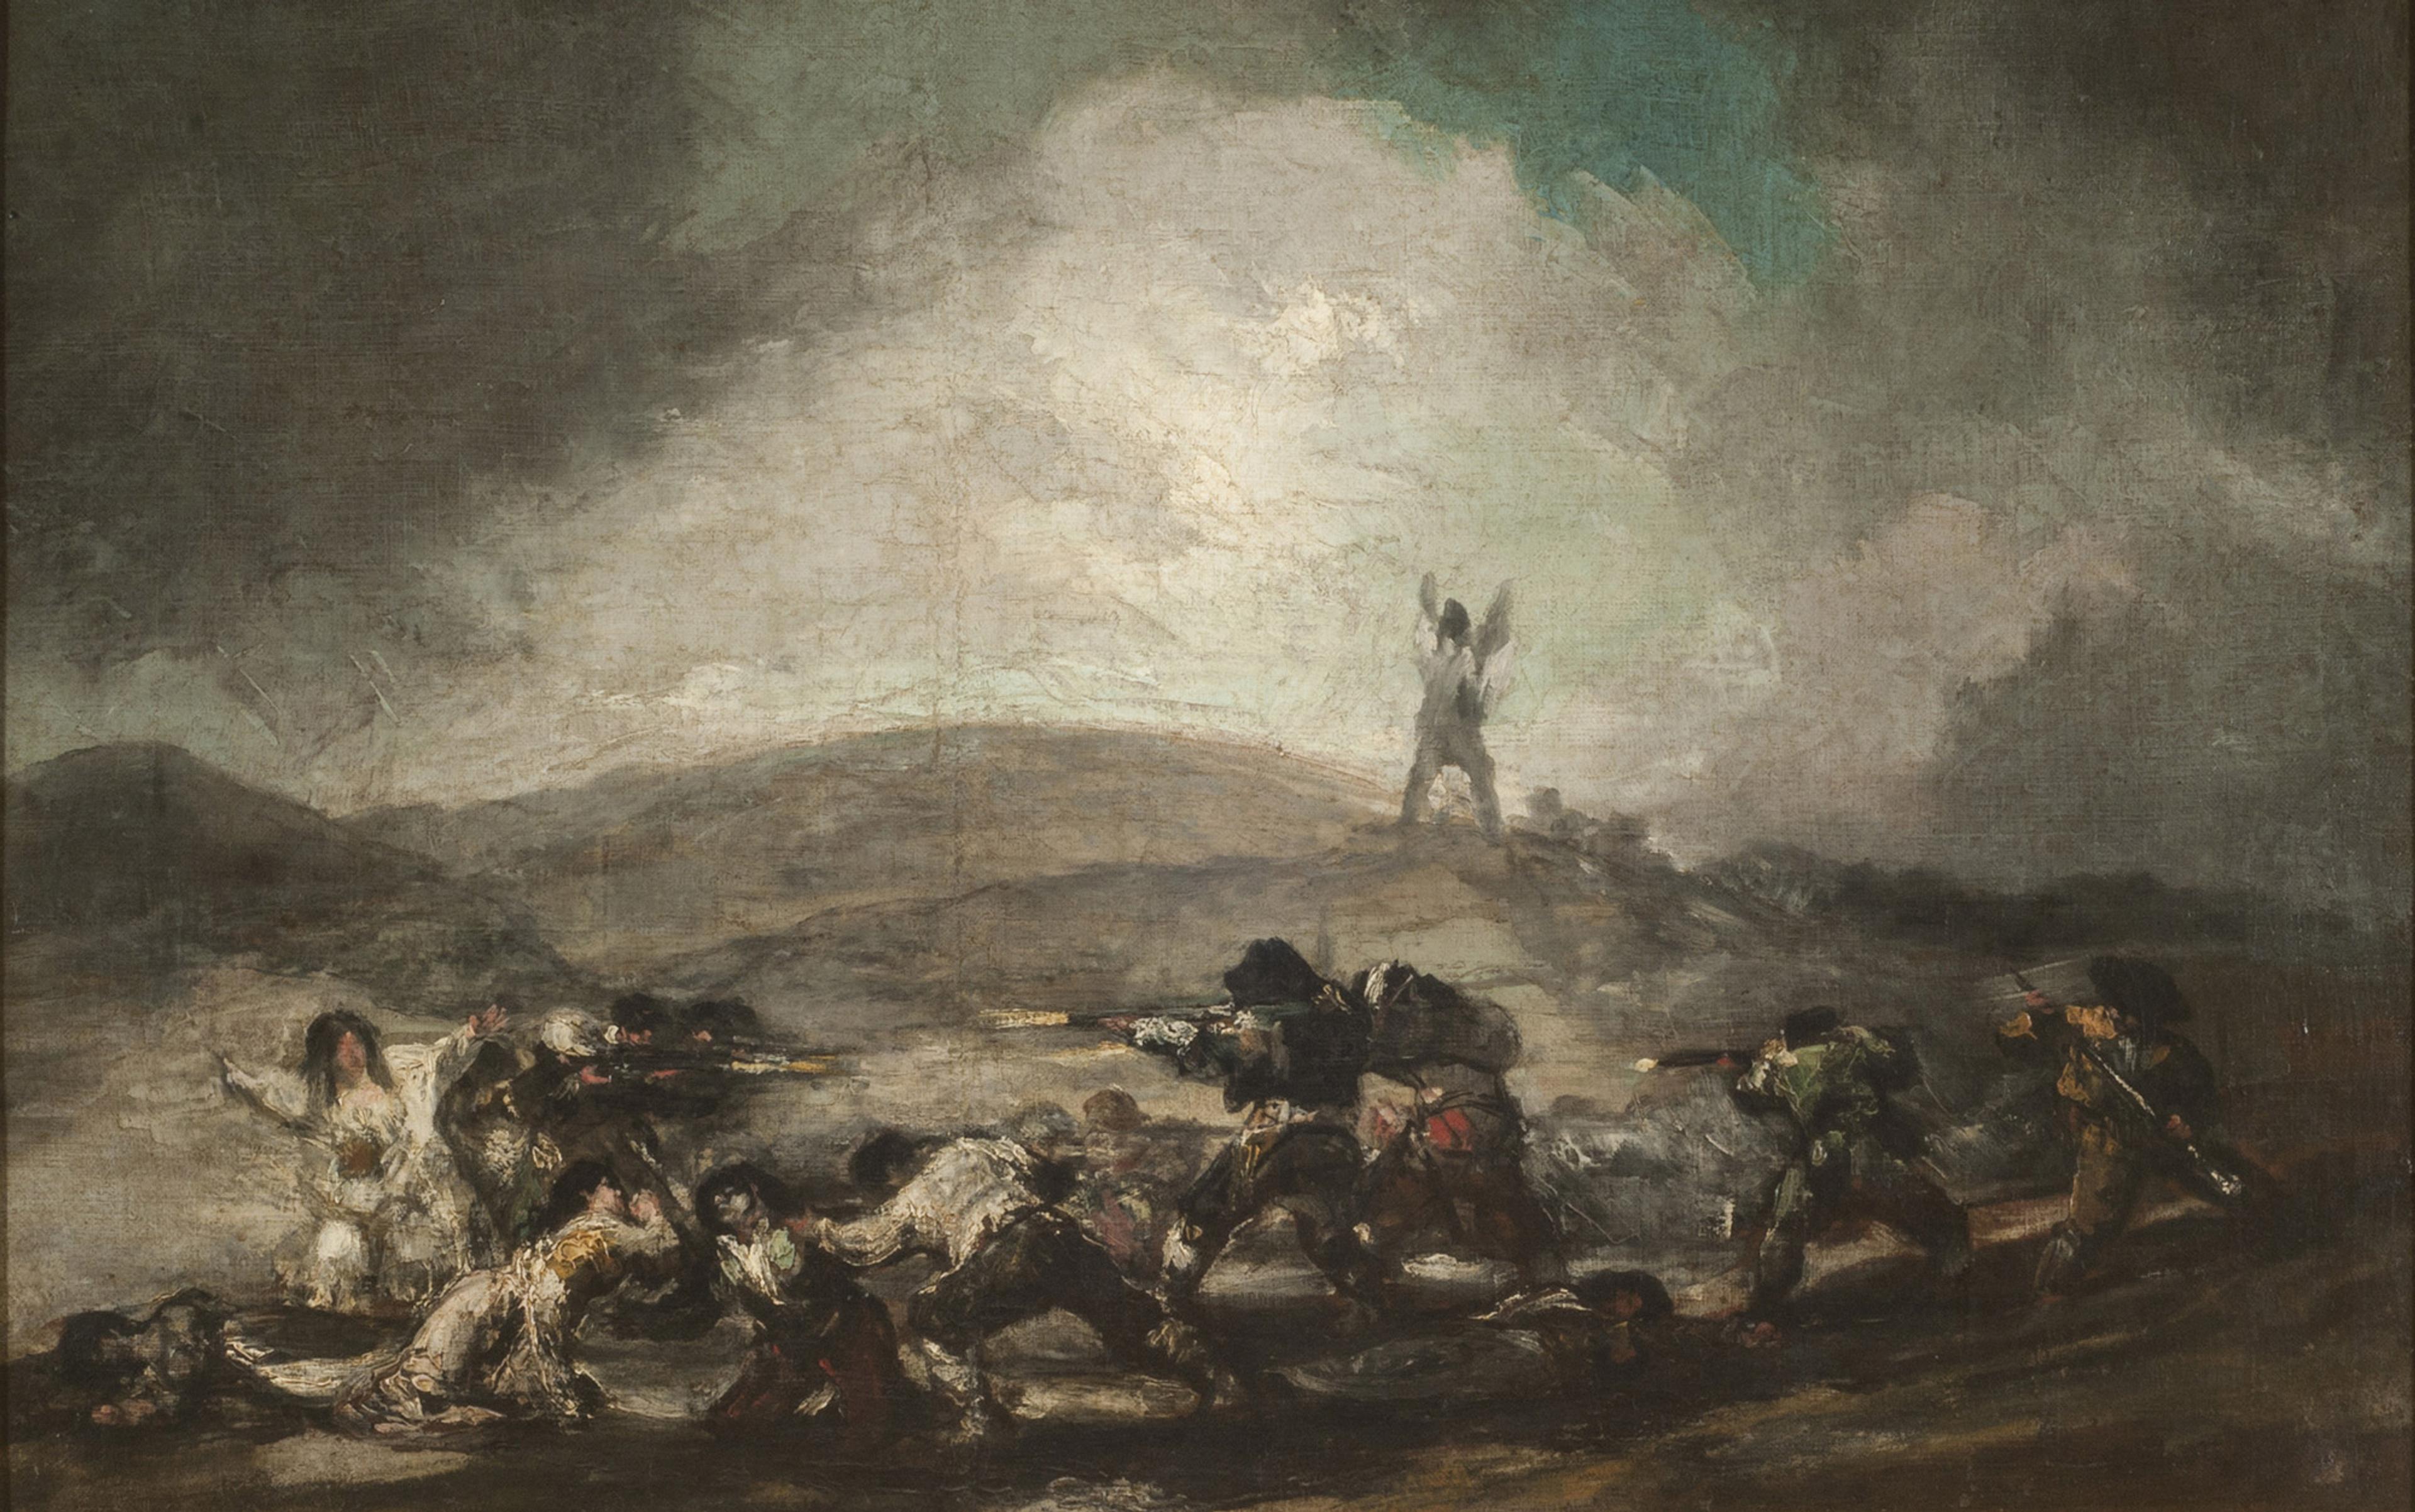 Painting of a group of soldiers aiming rifles, preparing to shoot kneeling and fallen prisoners, with a person surrendering in the background. Dark, dramatic sky.